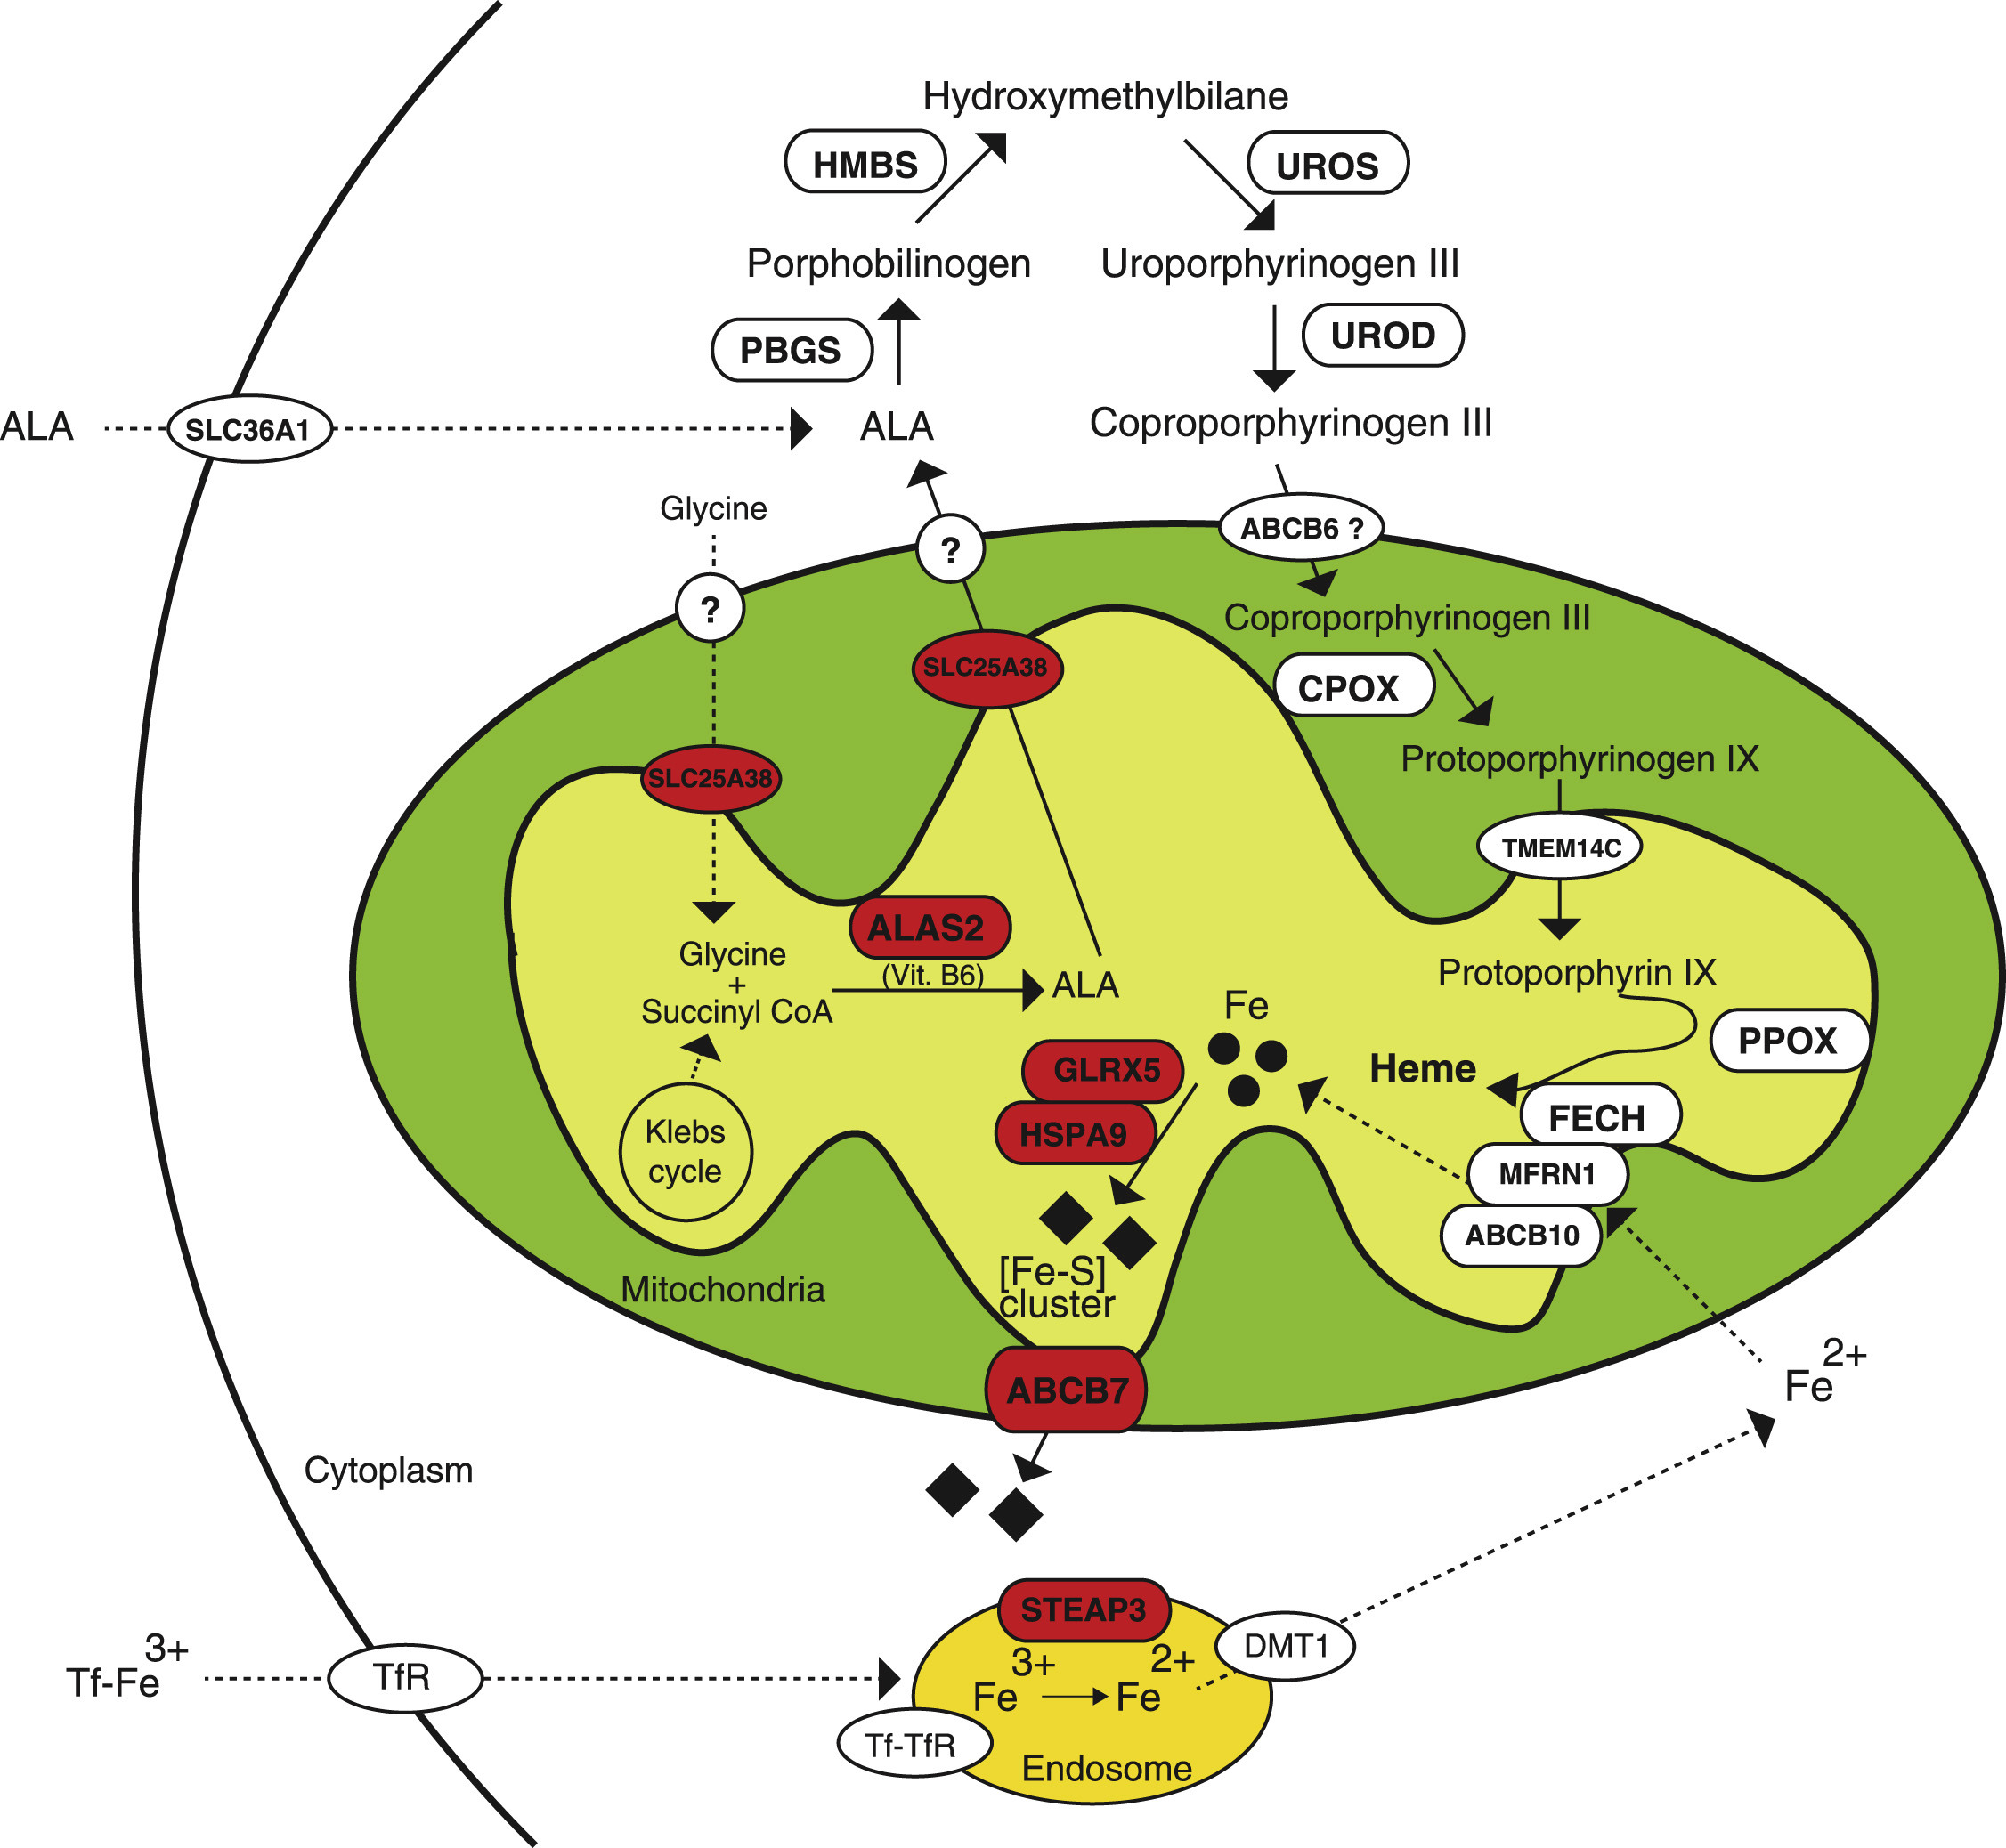 The heme biosynthetic pathway in erythroid cells.